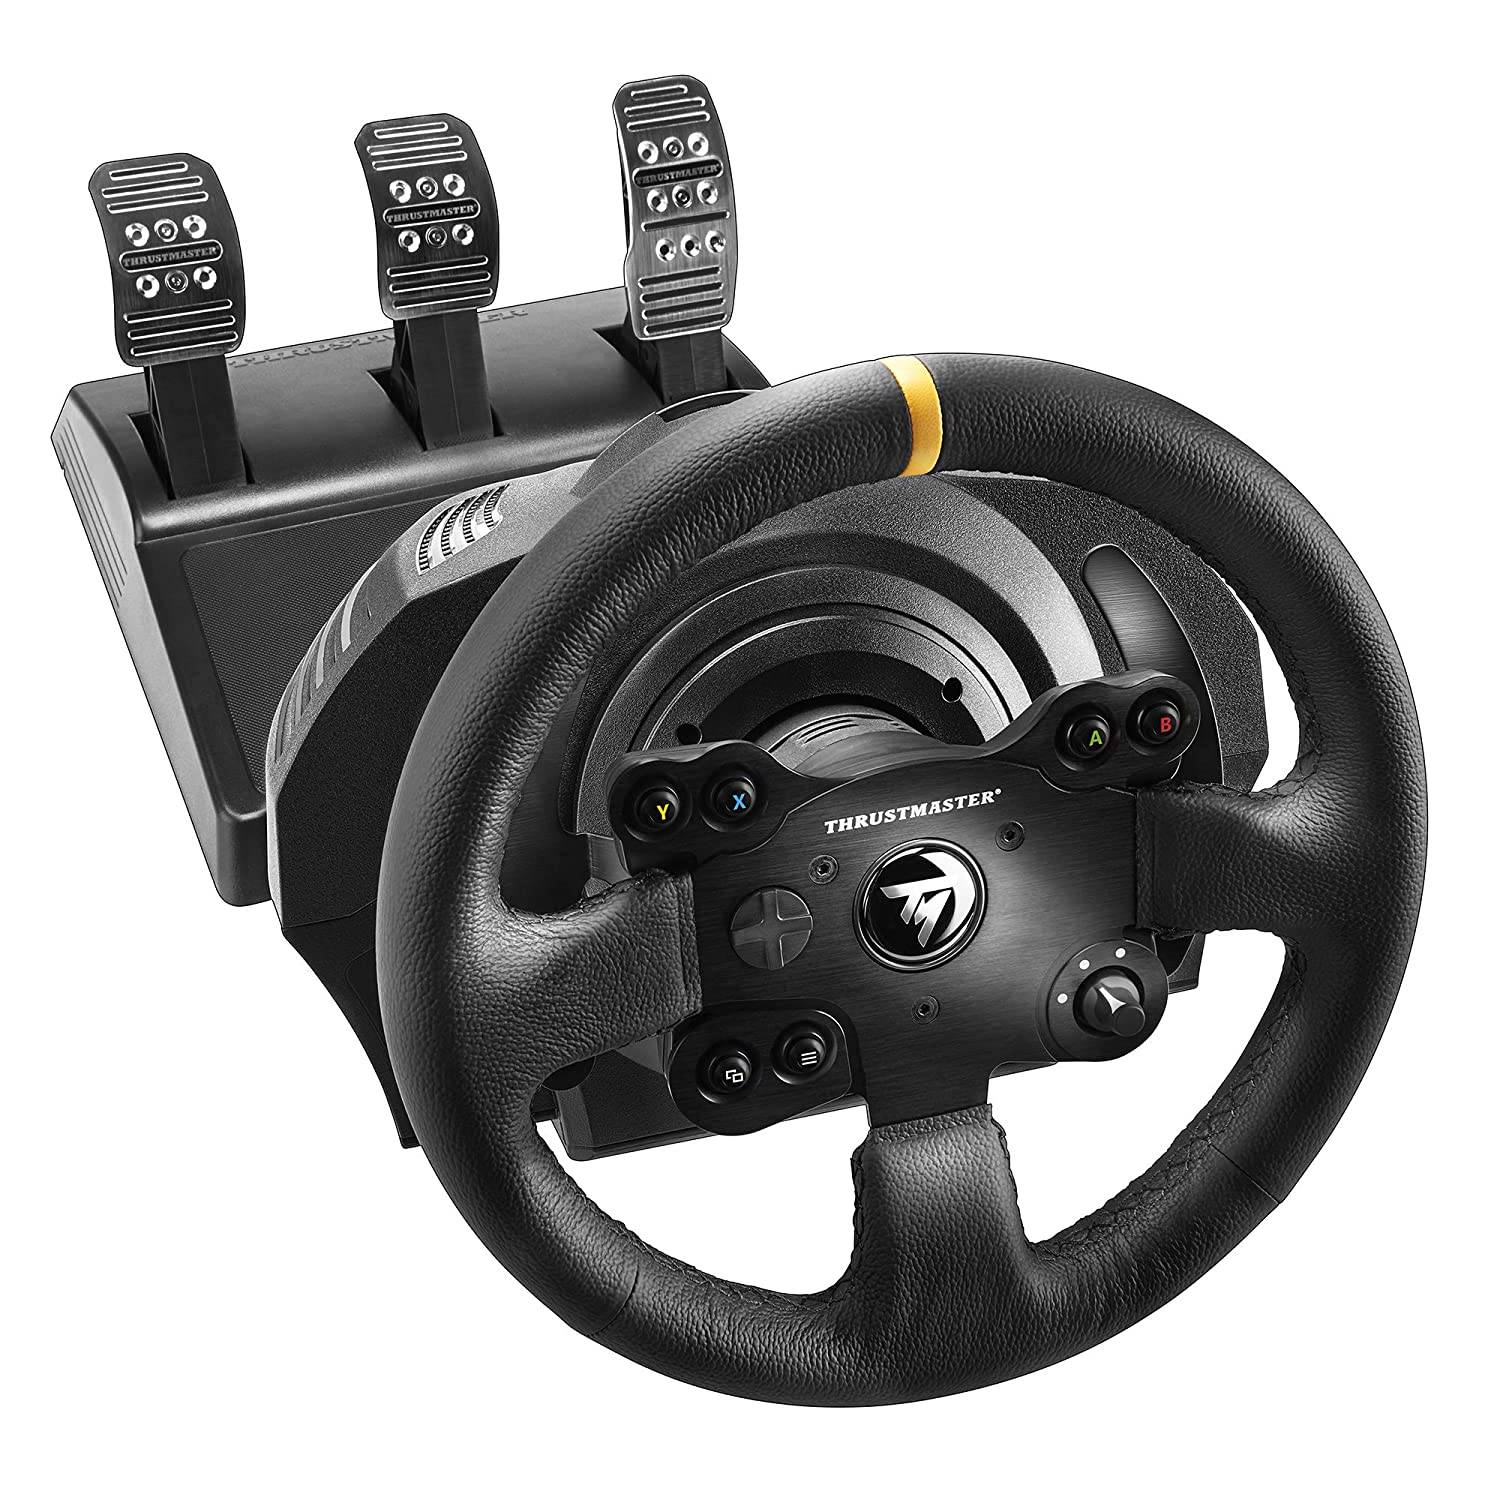 Used Thrustmaster TX Leather Edition Racing Wheel for Xbox Series X